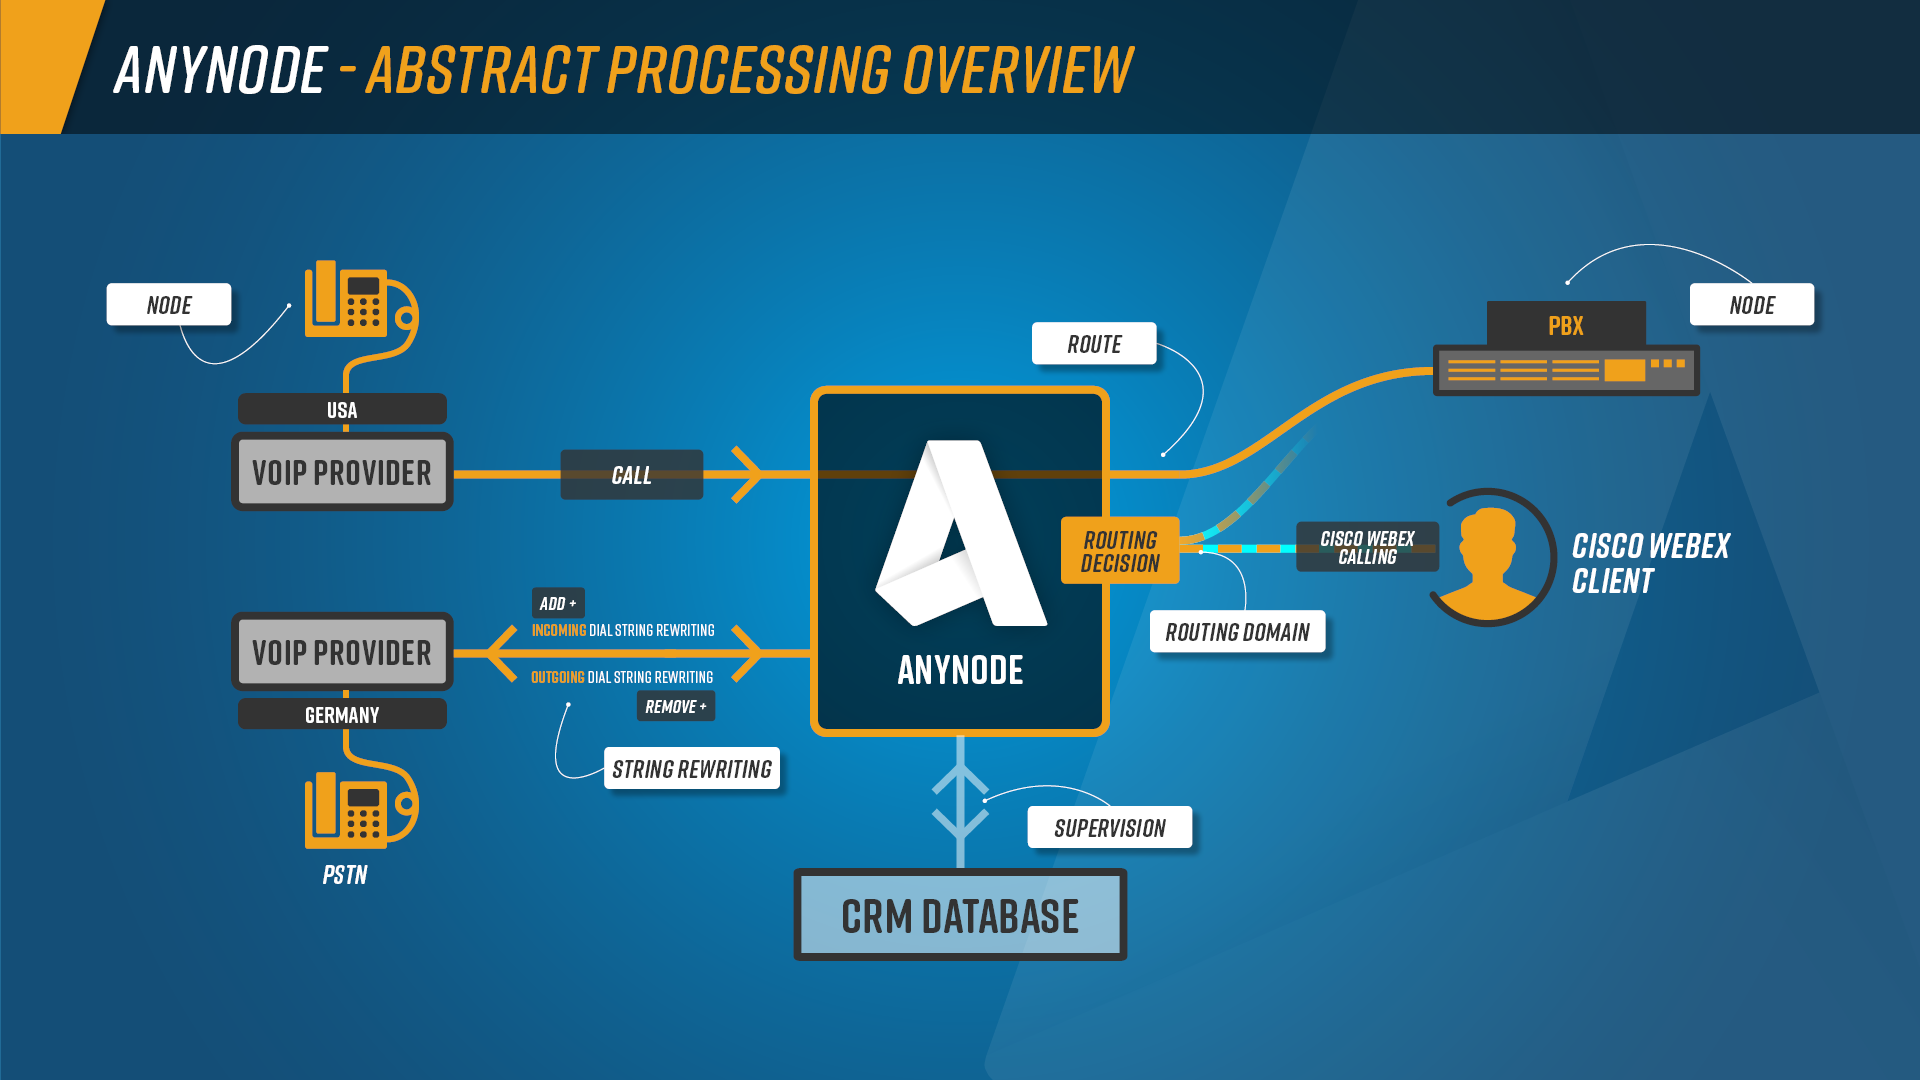 anynode-cisco-webex-calling-infographic-abstract-overview